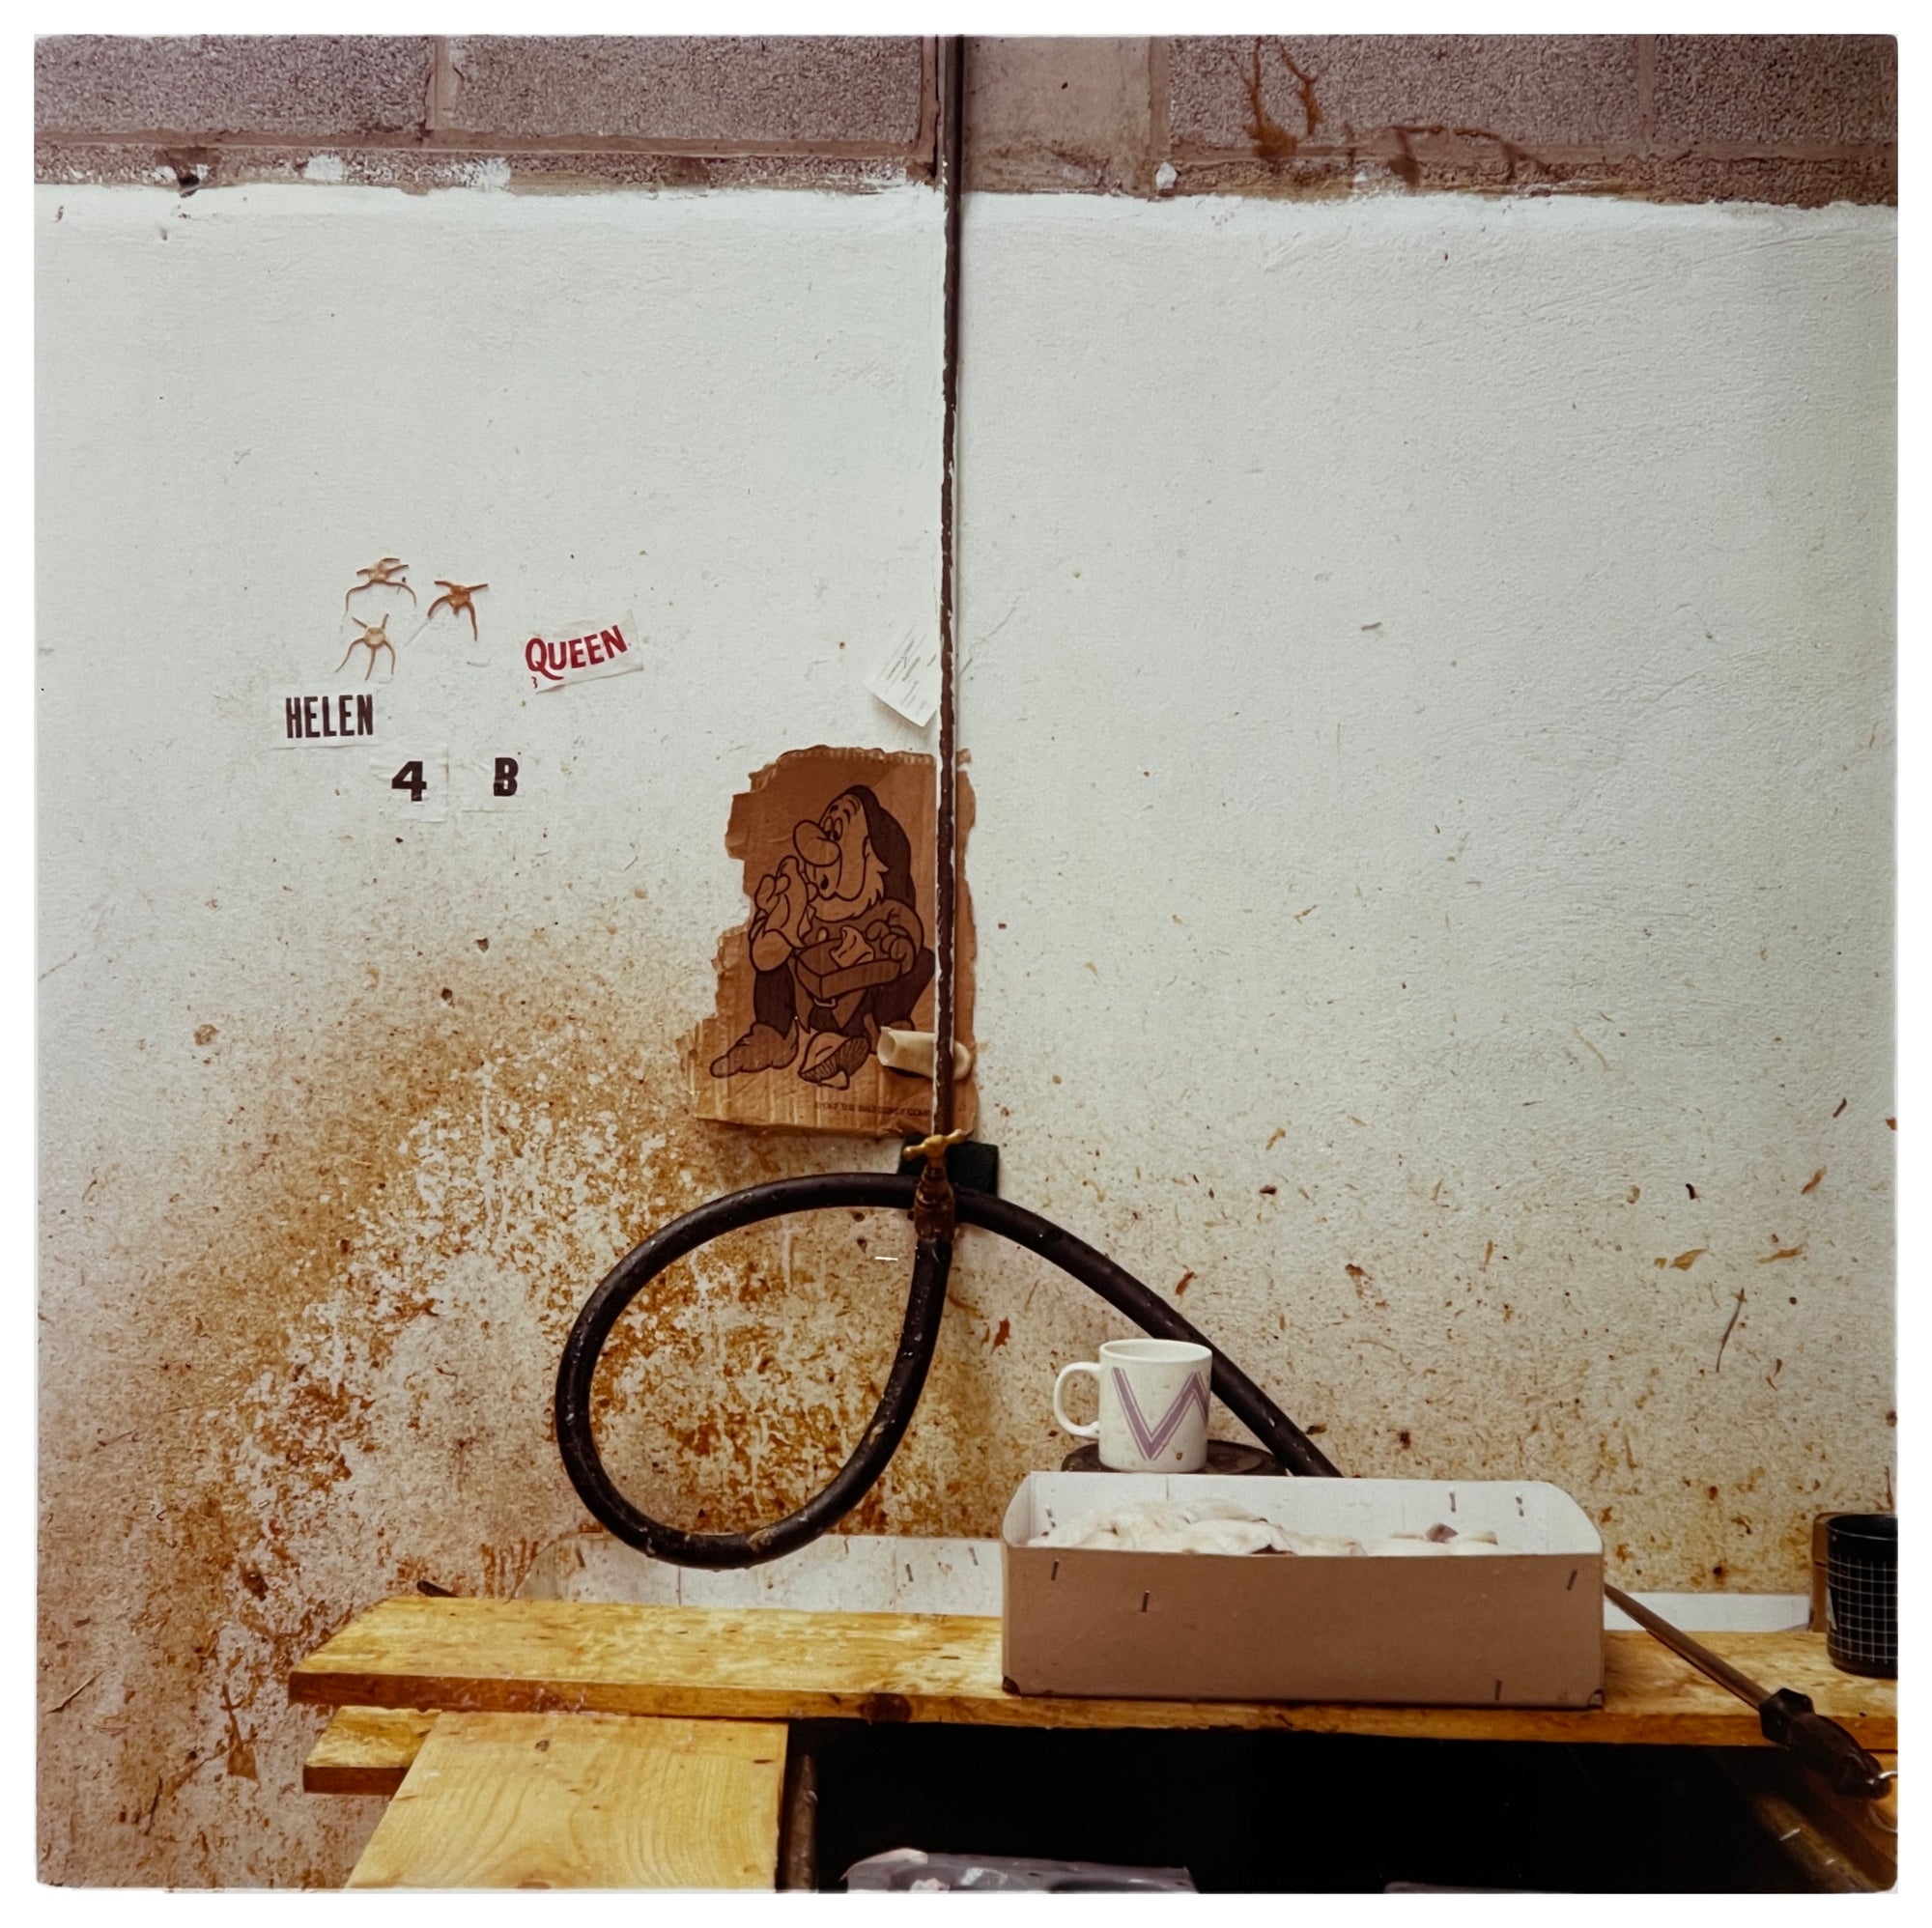 Photograph by Richard Heeps.  A bare wire is knotted on a dirty cream wall.  Stuck behind the main vertical wire is a picture of the Disney character Sneezy on a torn off bit of card.